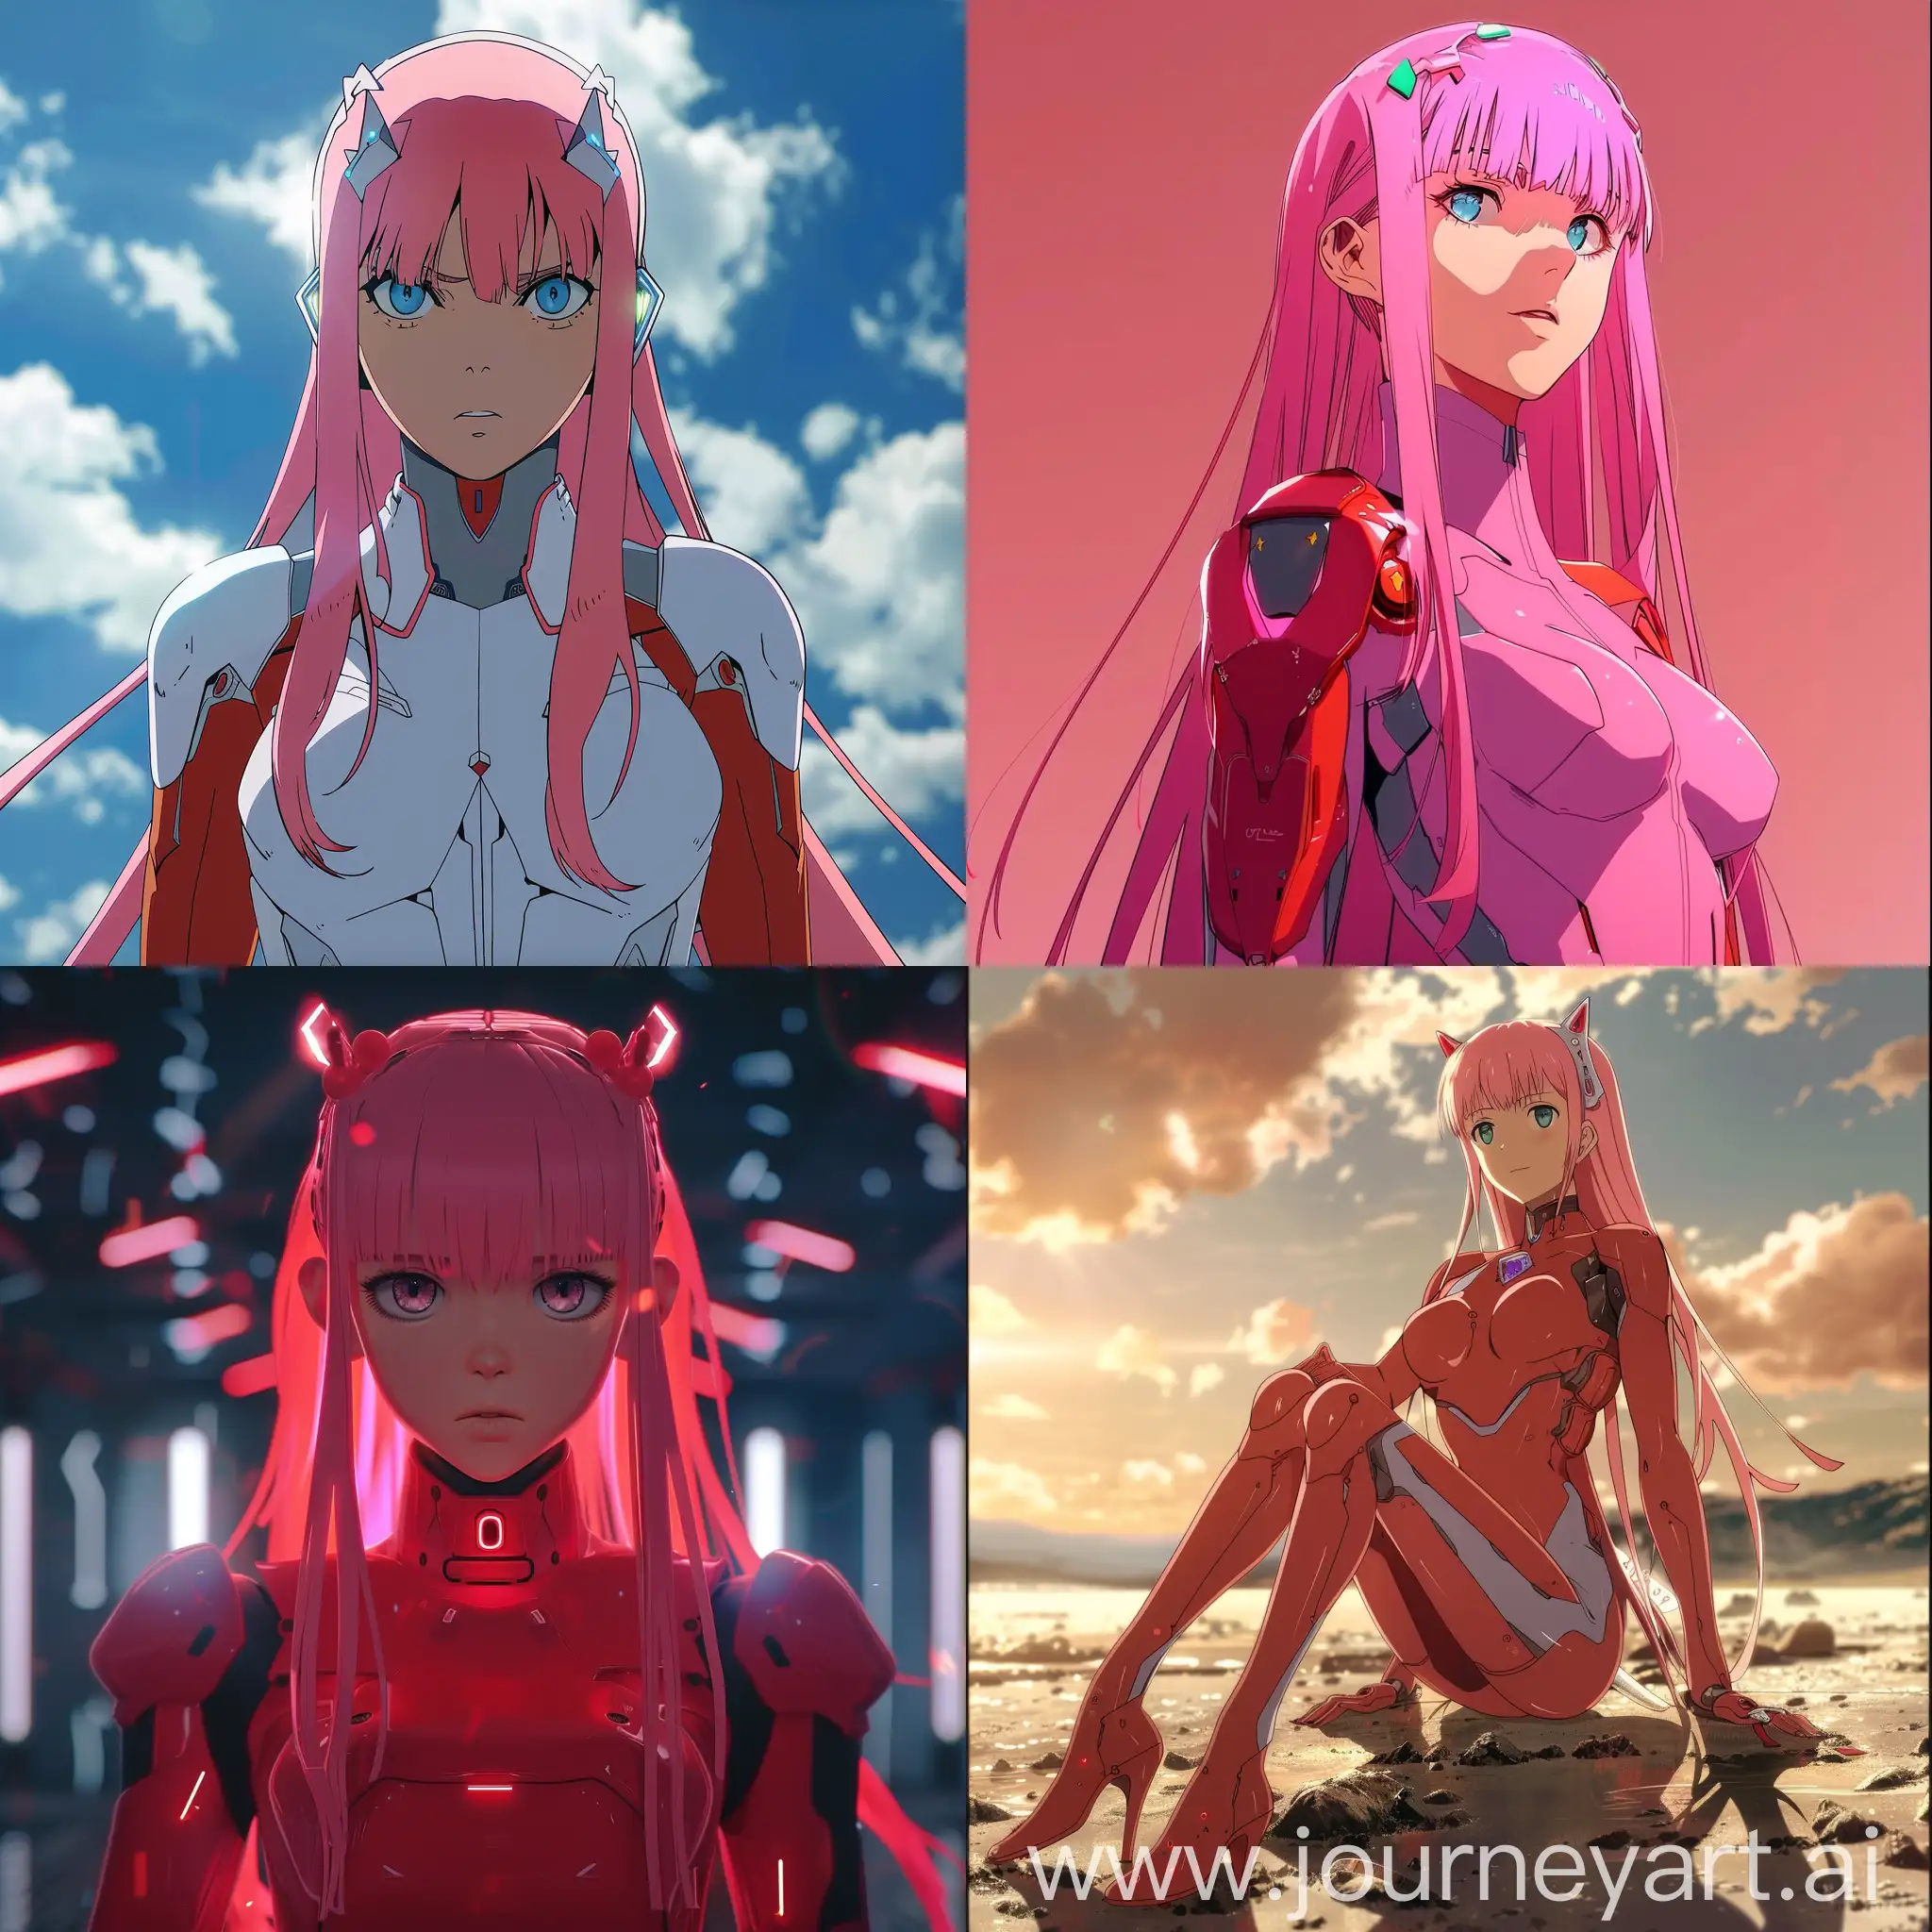 Anime-Character-Zero-Two-from-Darling-in-the-Franxx-Version-6-11-Aspect-Ratio-Art